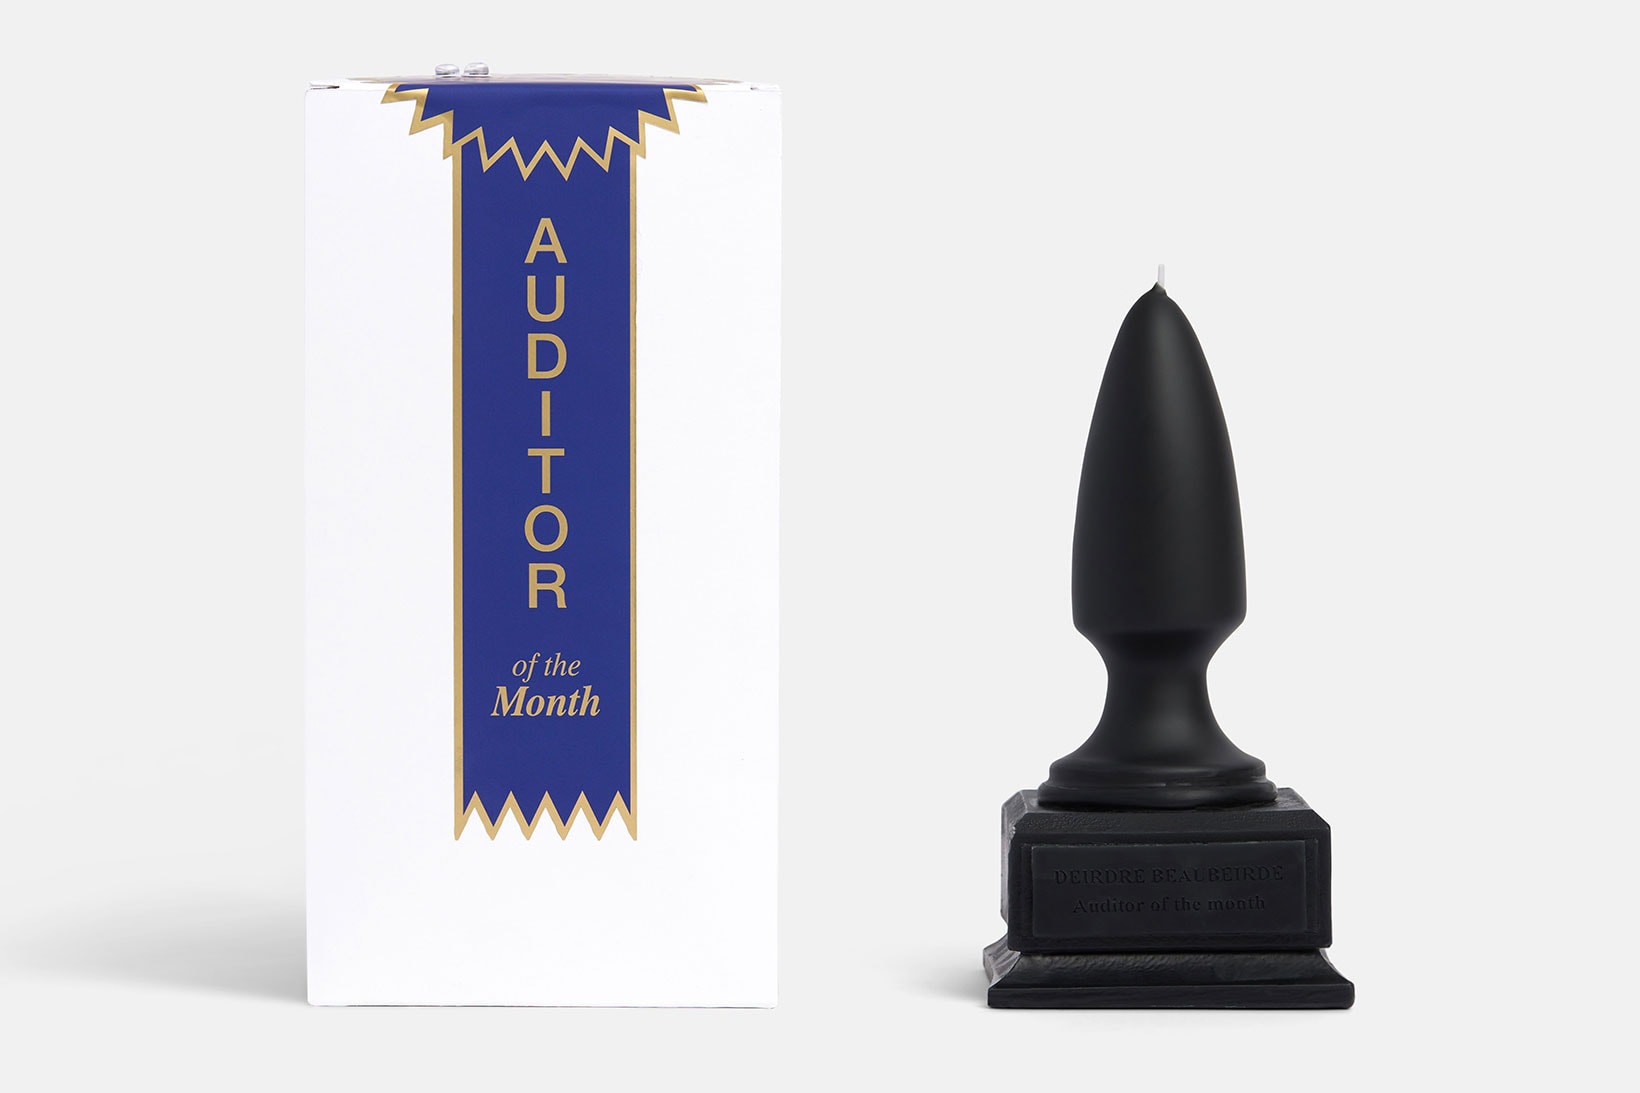 A24 Everything Everywhere All at Once Butt Plug Candle Auditor Trophy Joya Collaboration Release